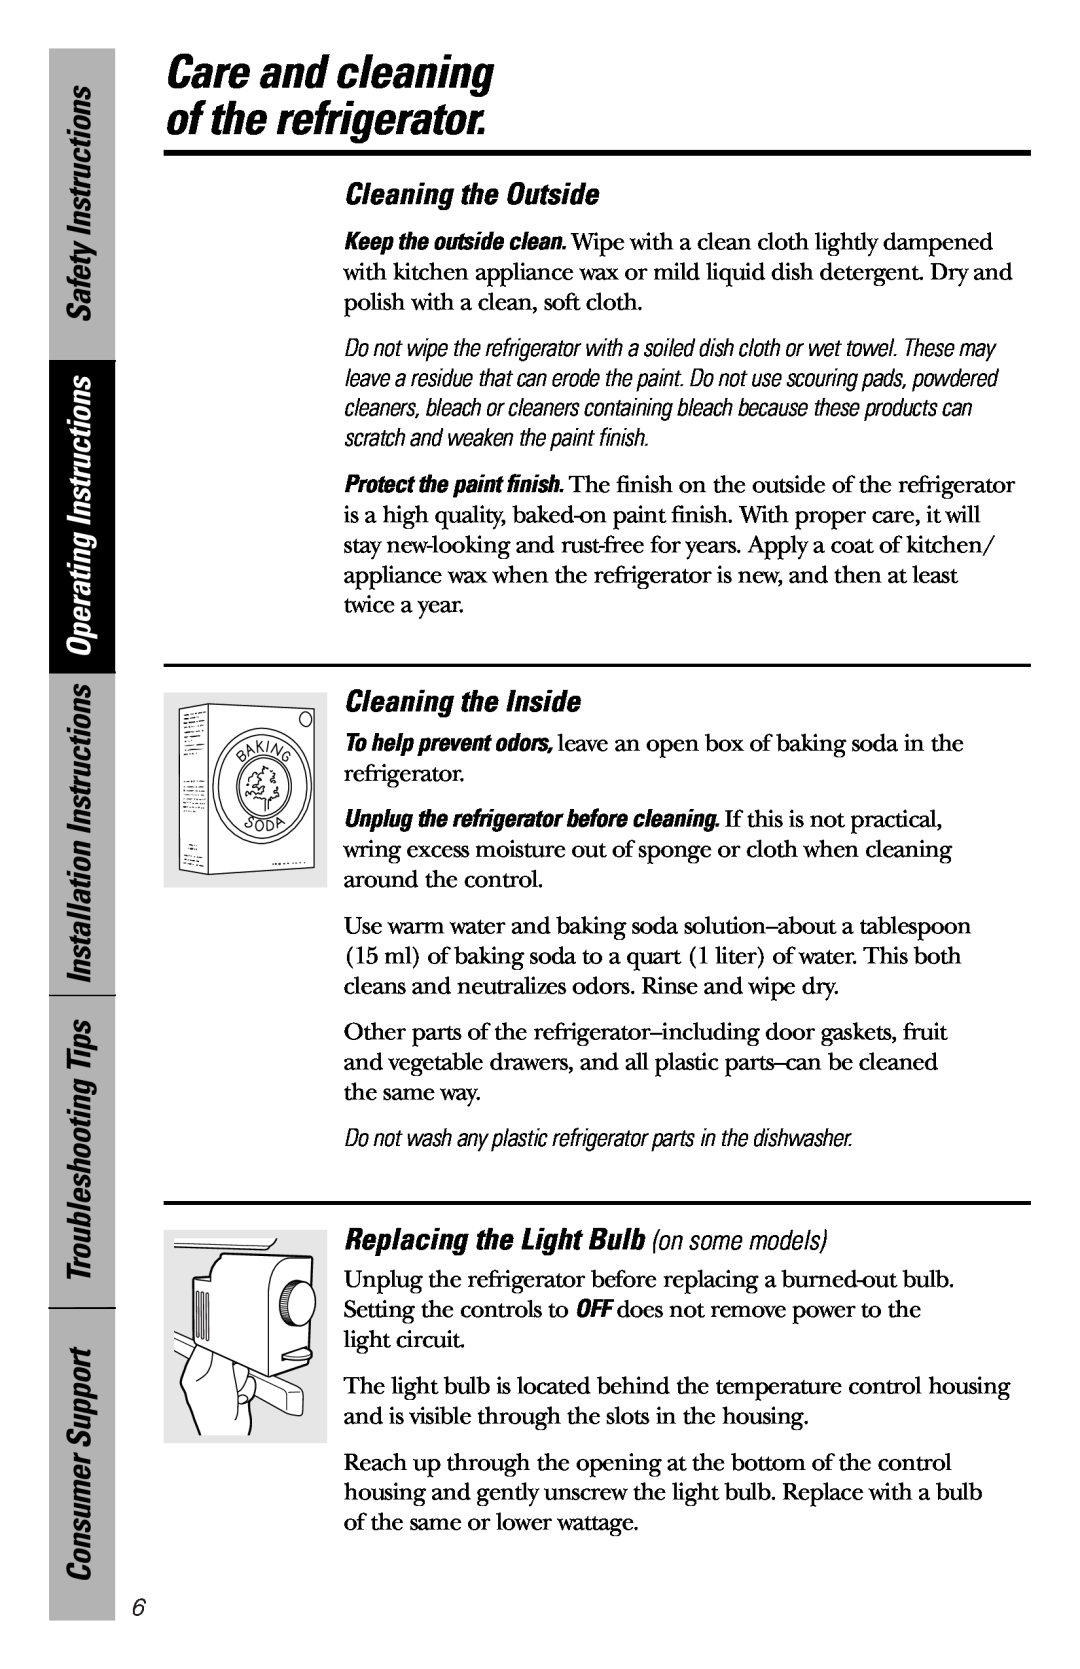 GE 162D9639P009 owner manual Care and cleaning of the refrigerator, Cleaning the Outside, Cleaning the Inside 